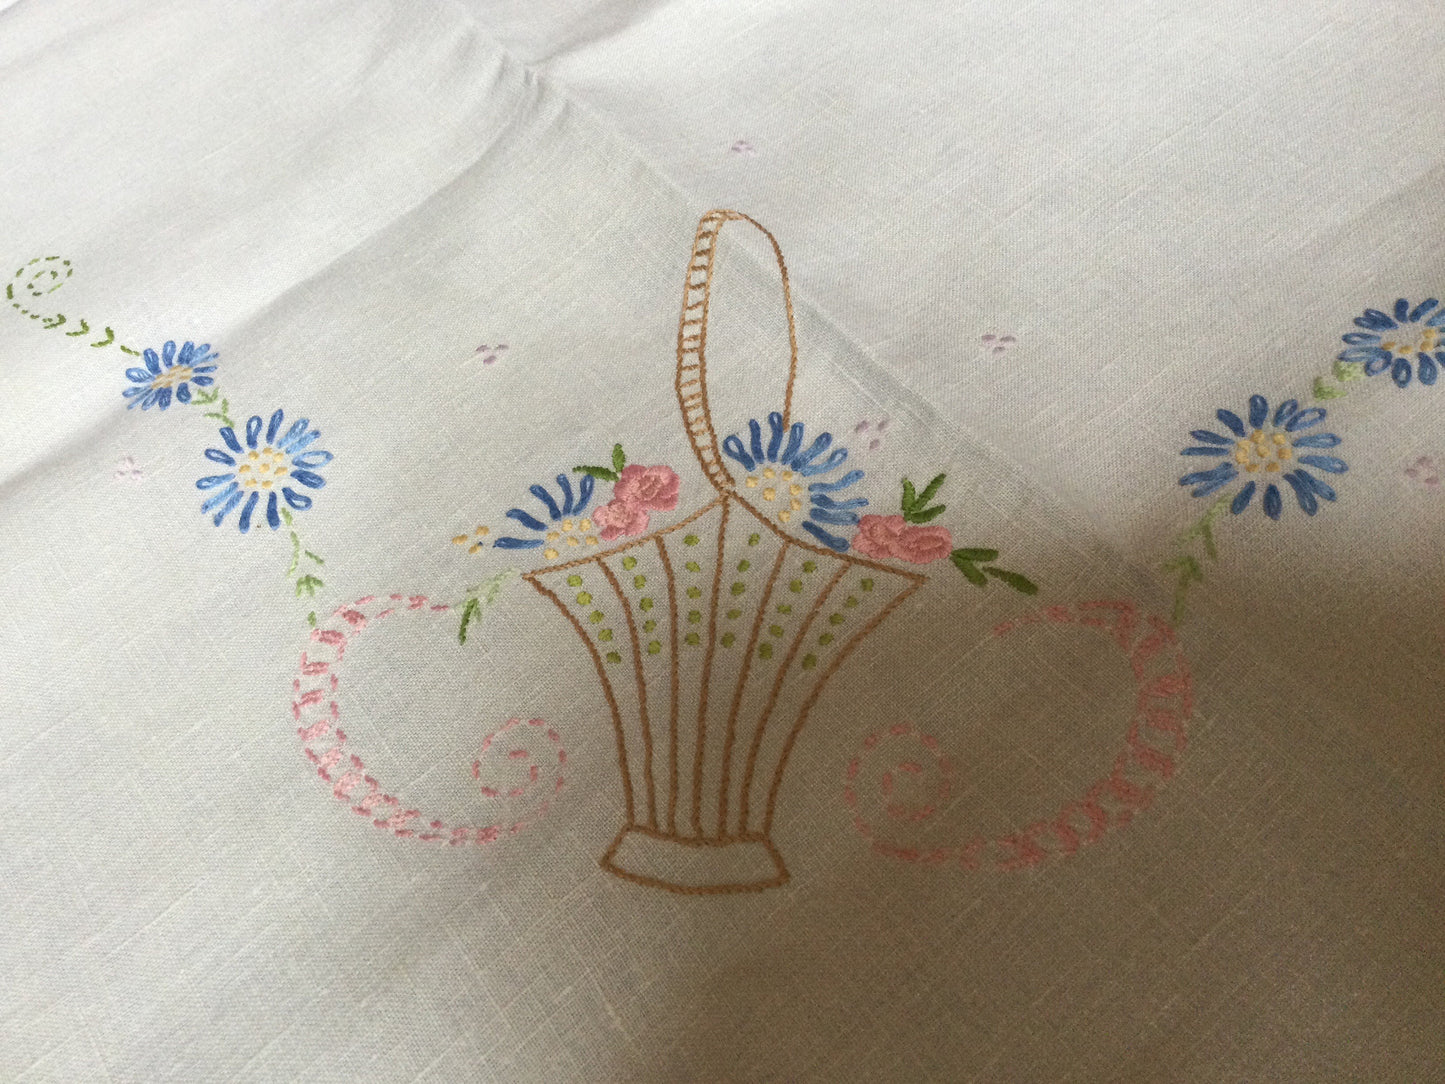 41” square large Retro Vintage table cloth white embroidered floral tablecloth blue pink basket embroidery flowers cottage